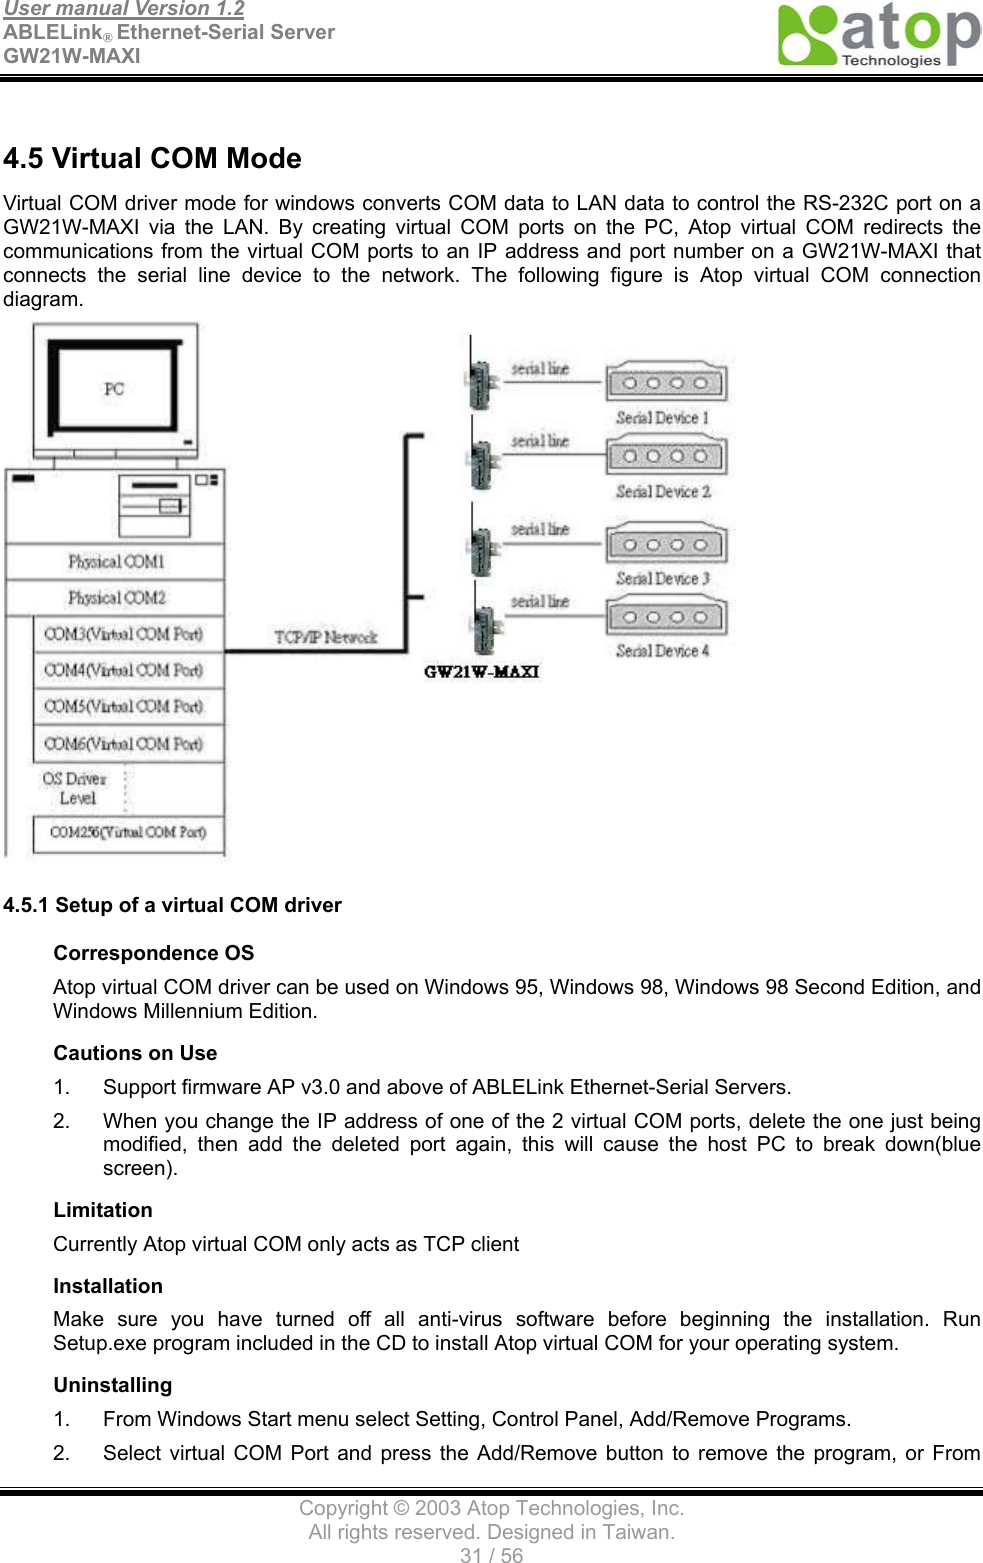 User manual Version 1.2 ABLELink® Ethernet-Serial Server   GW21W-MAXI                                      Copyright © 2003 Atop Technologies, Inc. All rights reserved. Designed in Taiwan. 31 / 56   4.5 Virtual COM Mode Virtual COM driver mode for windows converts COM data to LAN data to control the RS-232C port on a GW21W-MAXI via the LAN. By creating virtual COM ports on the PC, Atop virtual COM redirects the communications from the virtual COM ports to an IP address and port number on a GW21W-MAXI that connects the serial line device to the network. The following figure is Atop virtual COM connection diagram.   4.5.1 Setup of a virtual COM driver Correspondence OS Atop virtual COM driver can be used on Windows 95, Windows 98, Windows 98 Second Edition, and Windows Millennium Edition. Cautions on Use 1.  Support firmware AP v3.0 and above of ABLELink Ethernet-Serial Servers. 2.  When you change the IP address of one of the 2 virtual COM ports, delete the one just being modified, then add the deleted port again, this will cause the host PC to break down(blue screen). Limitation Currently Atop virtual COM only acts as TCP client Installation Make sure you have turned off all anti-virus software before beginning the installation. Run Setup.exe program included in the CD to install Atop virtual COM for your operating system. Uninstalling 1.  From Windows Start menu select Setting, Control Panel, Add/Remove Programs. 2.  Select virtual COM Port and press the Add/Remove button to remove the program, or From 